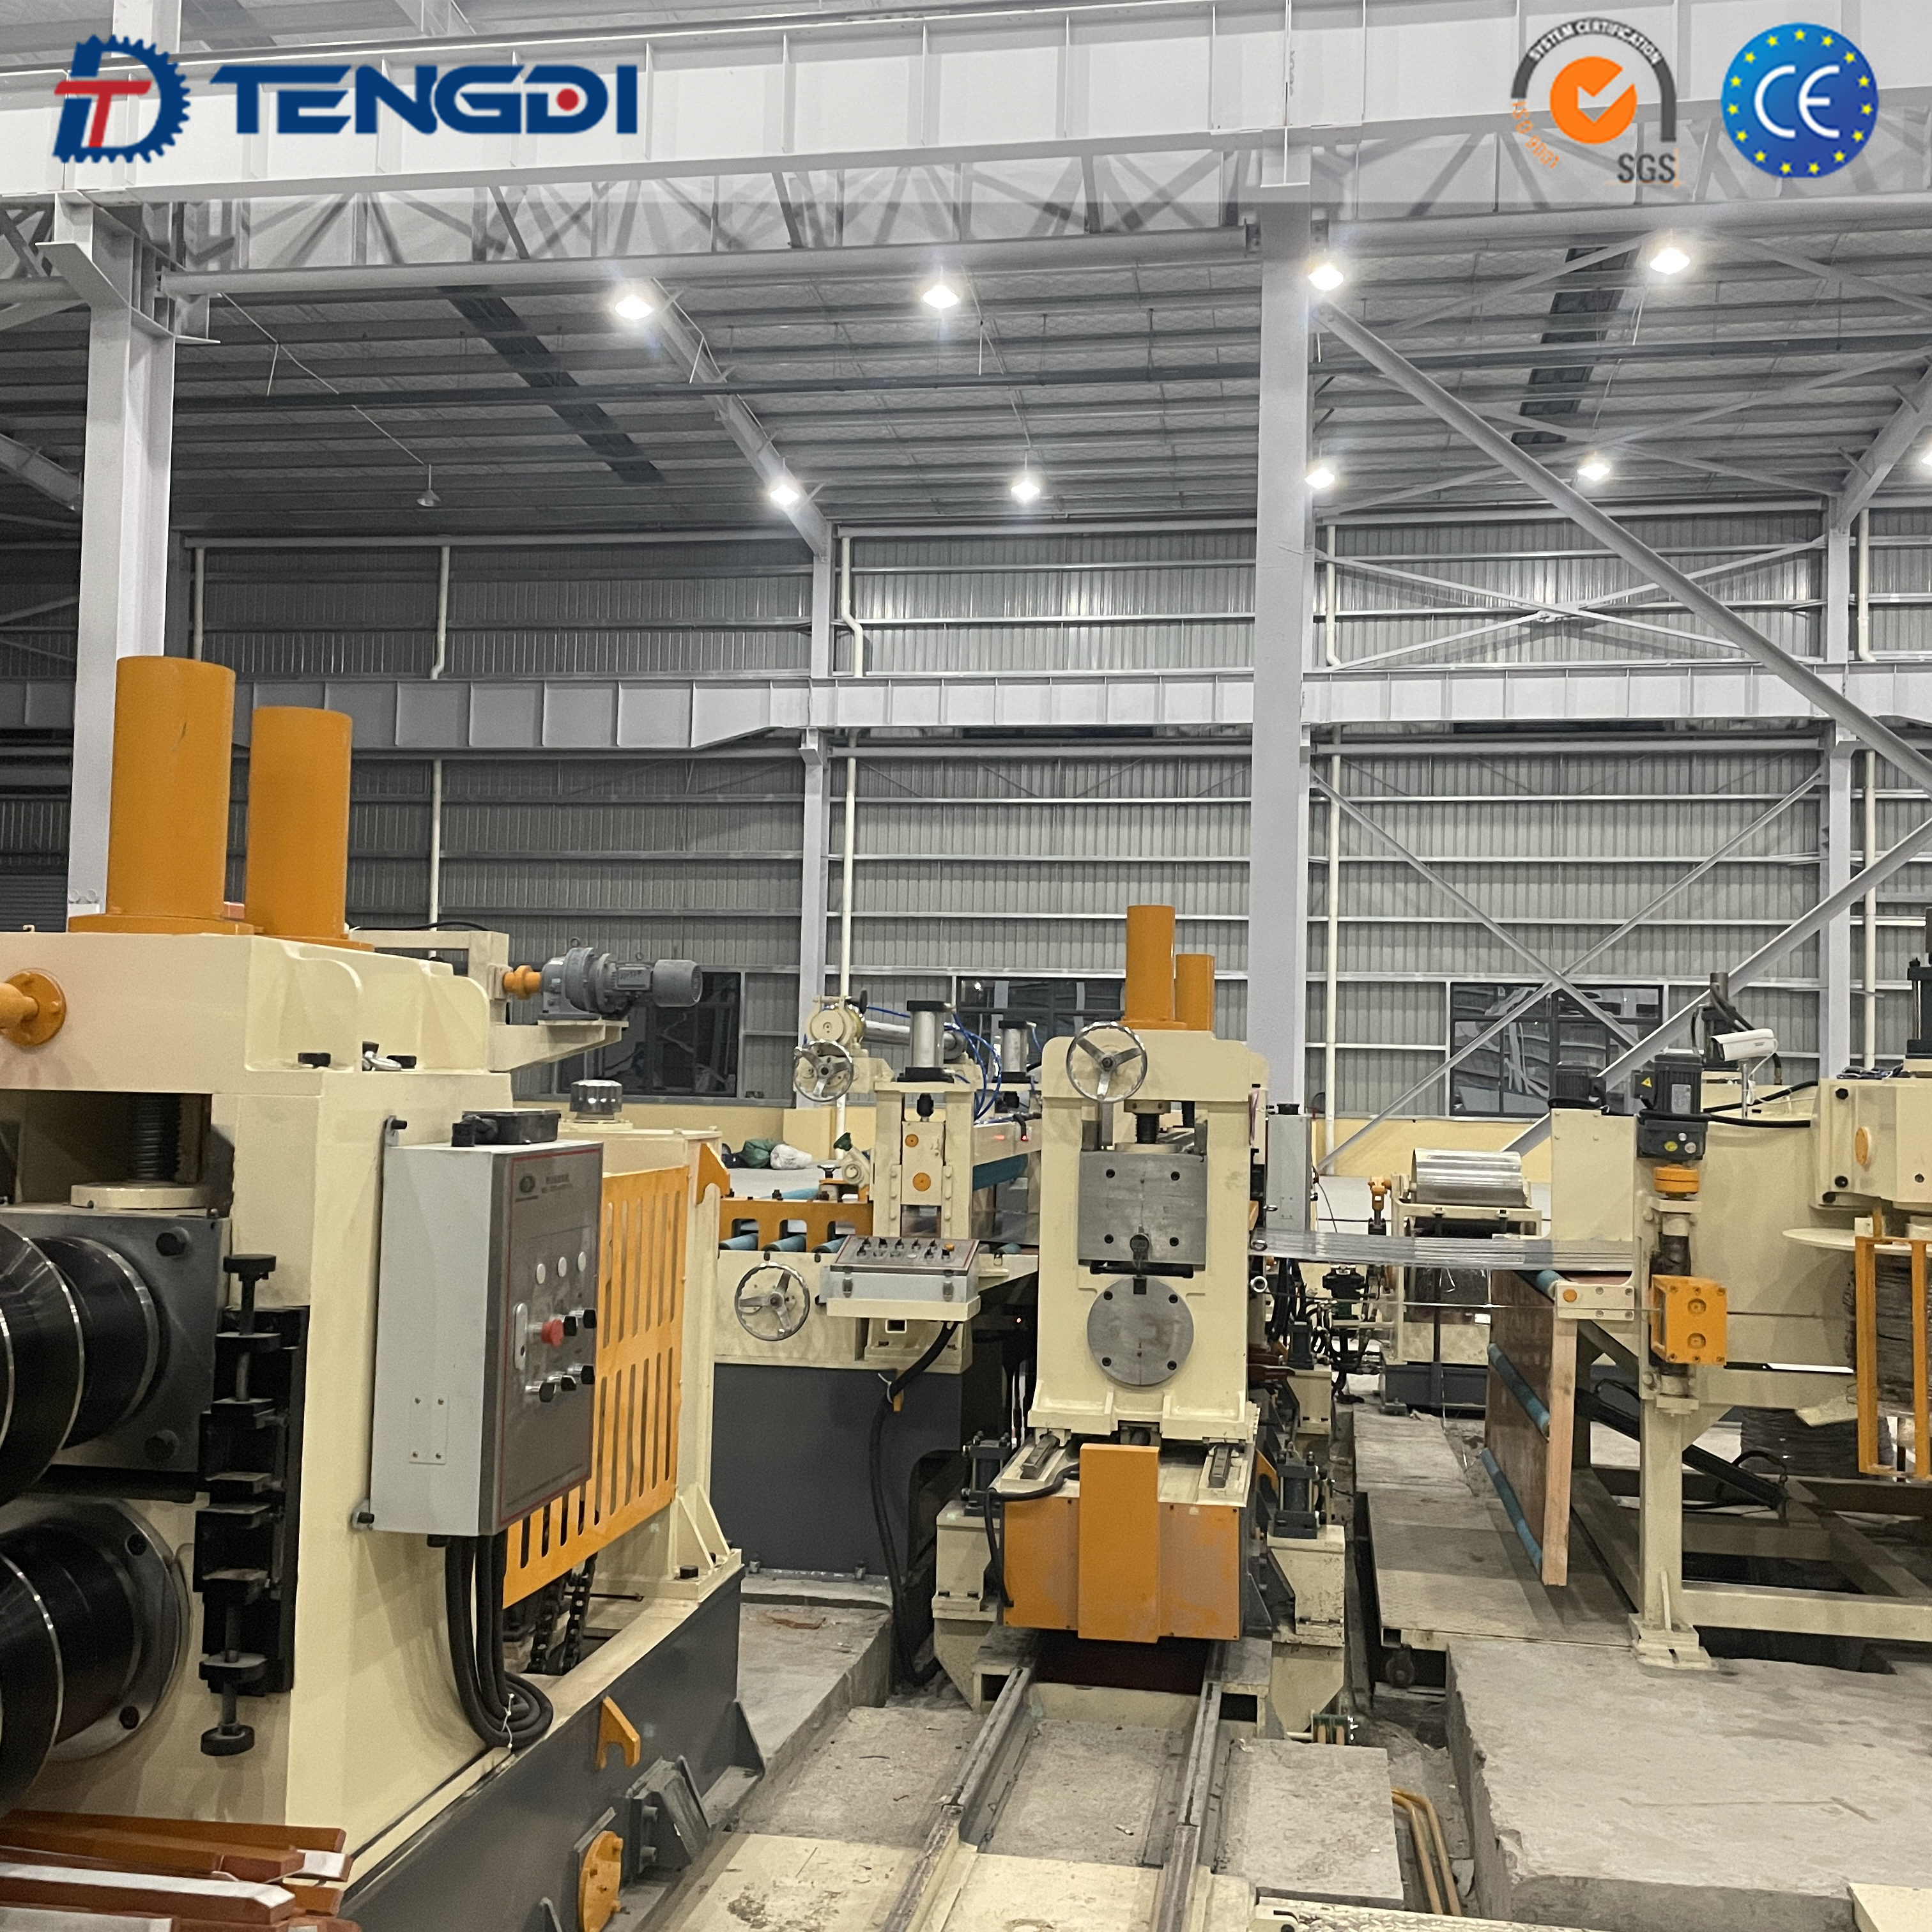 CNC Stainless Steel / Cr / Hr Silicon Steel Coil Slitting Machine / Line 3X1600 with CE Certificate 3 Year Warranty